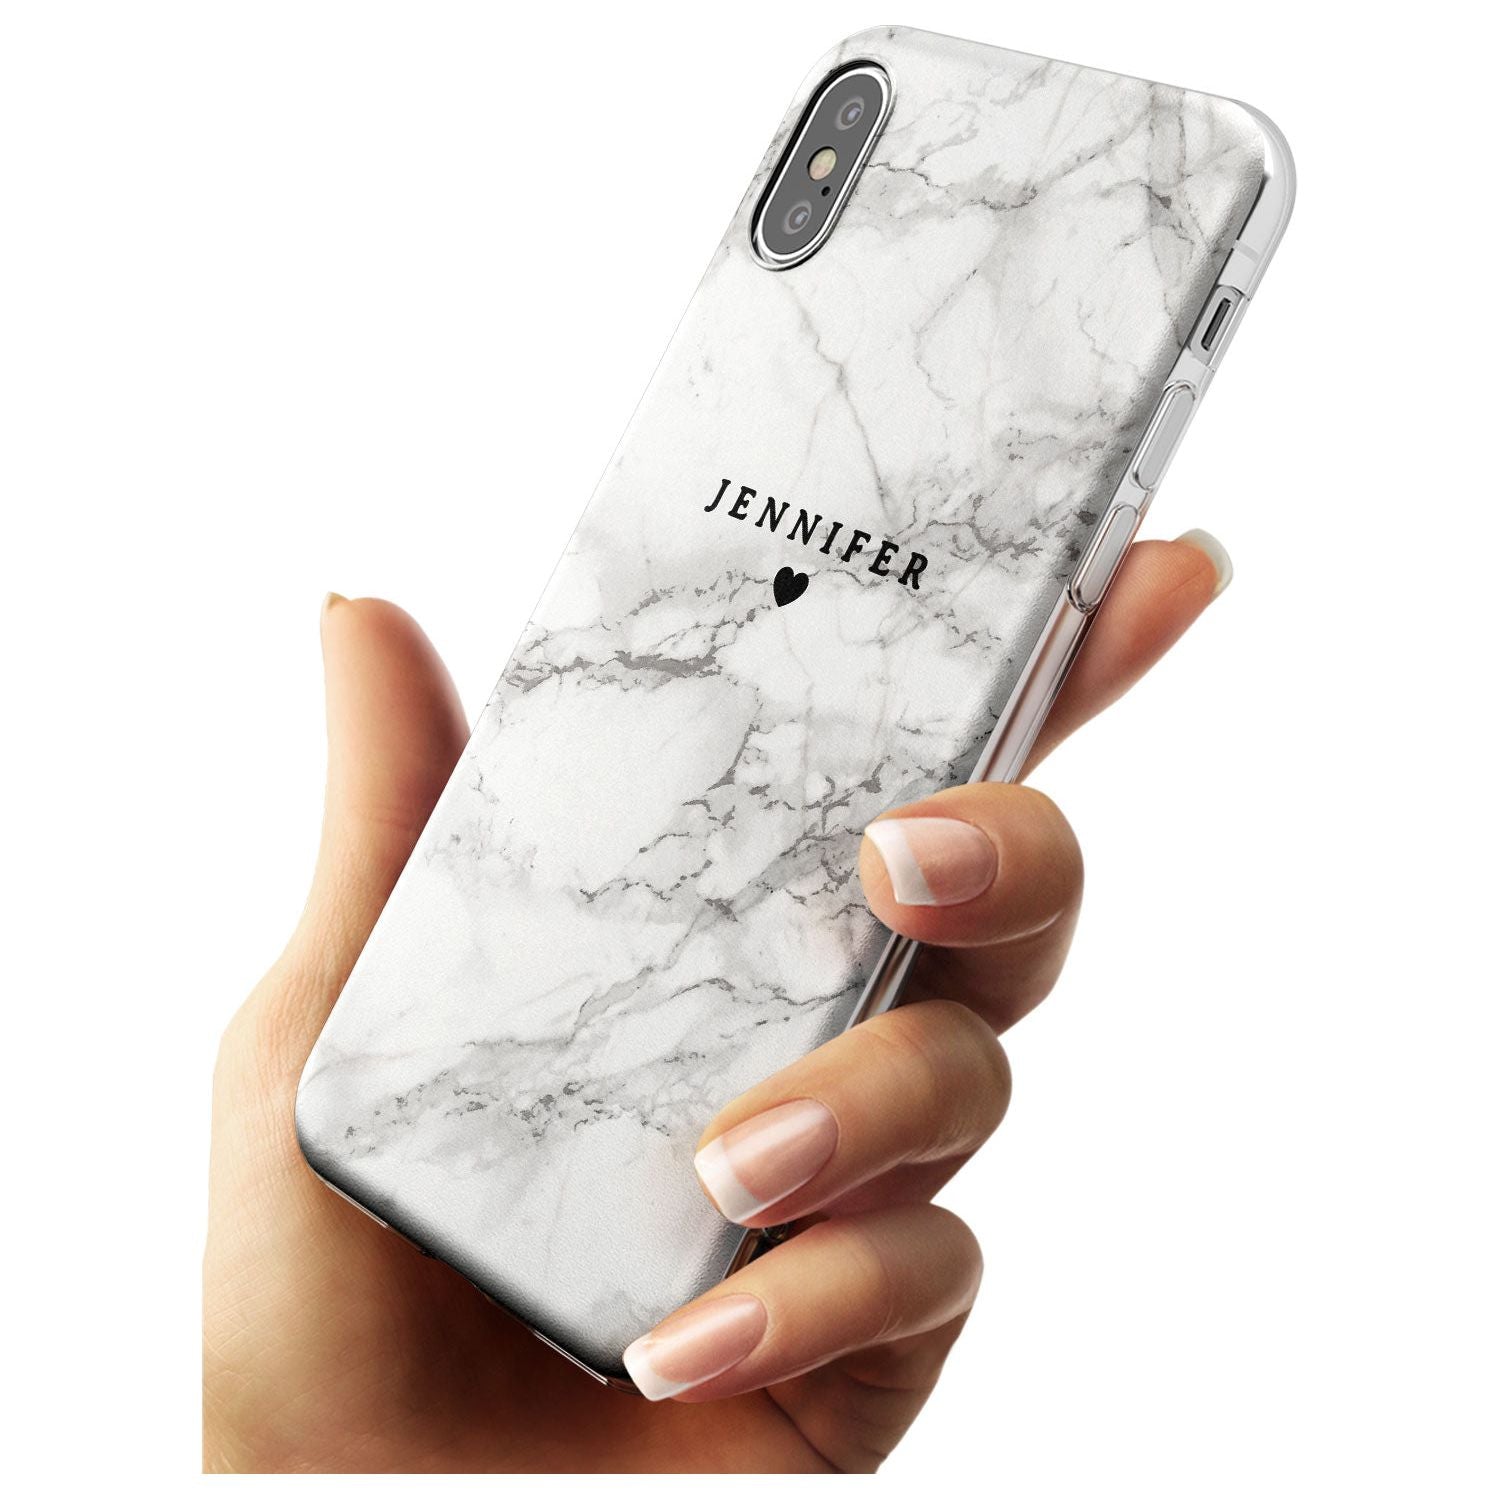 Personalised Light Grey Classic Marble Black Impact Phone Case for iPhone X XS Max XR